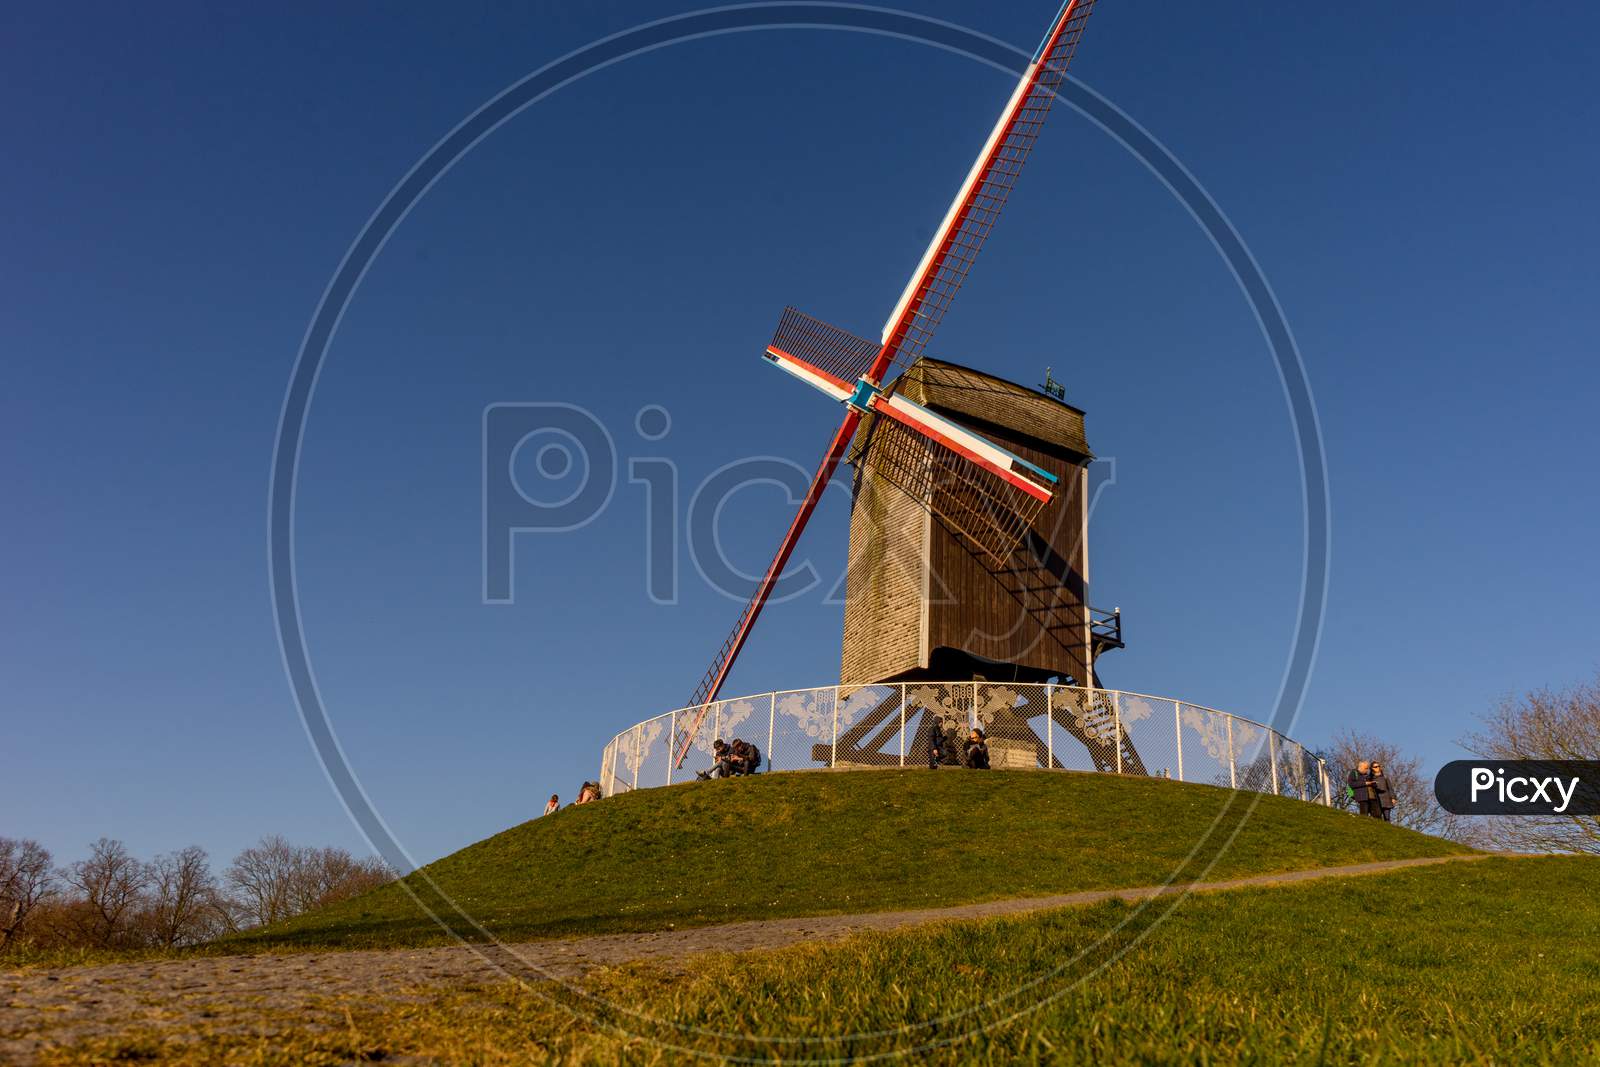 Belgium, Bruges, A Clock Tower On Top Of A Grass Covered Field With Windmill Island In The Background